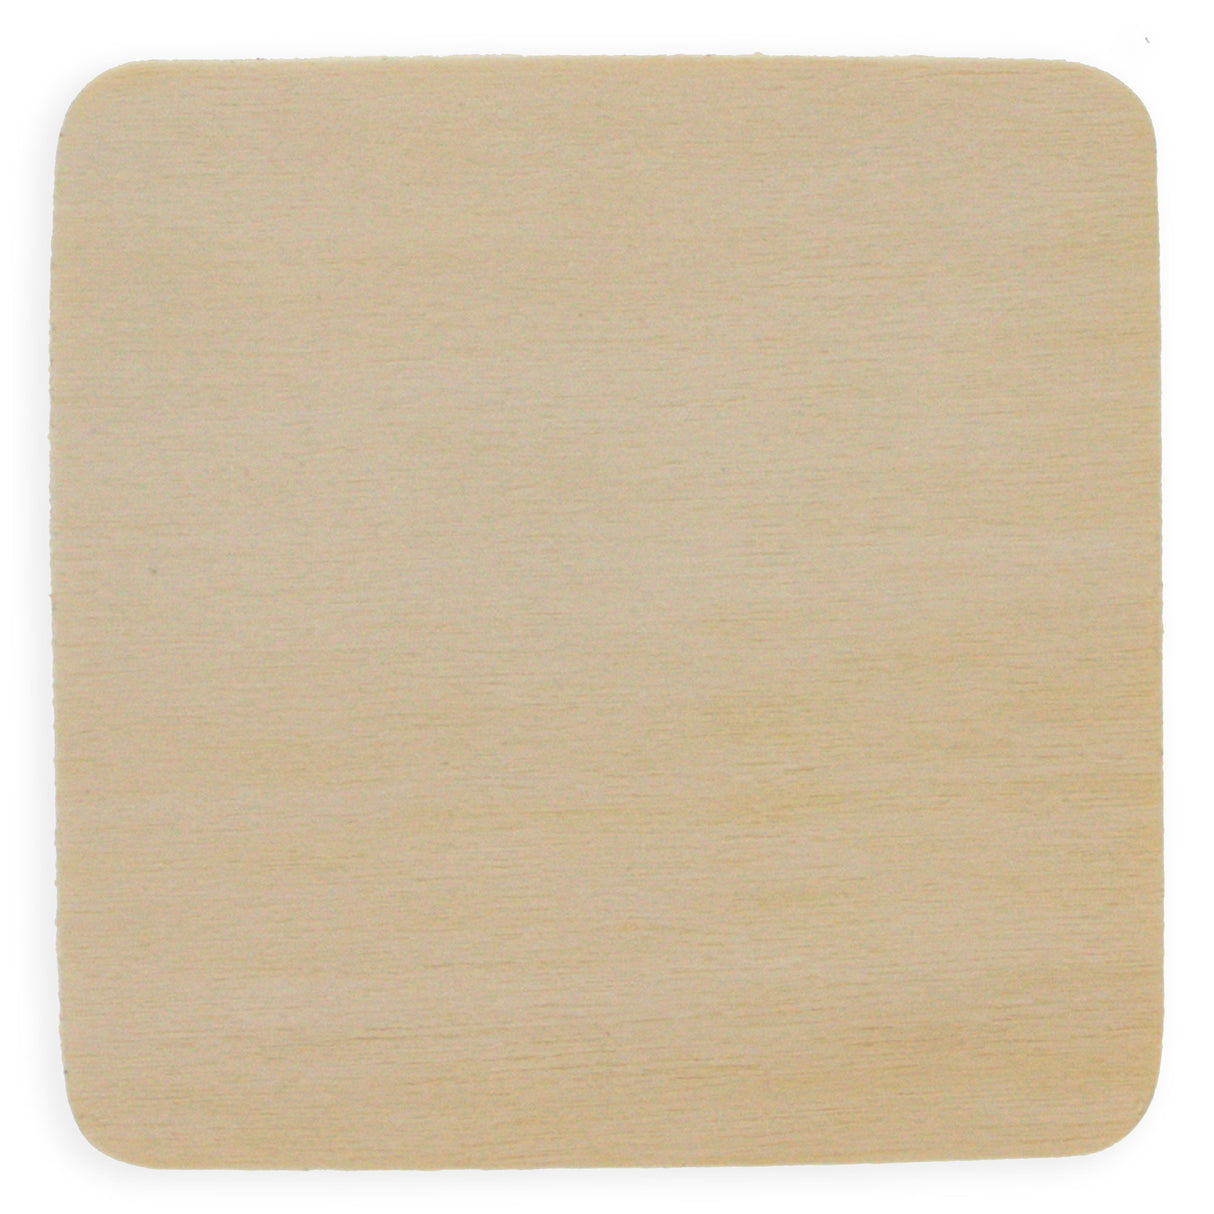 3-Inch Unfinished Square Wooden Plaque for DIY Crafts in Beige color, Square shape